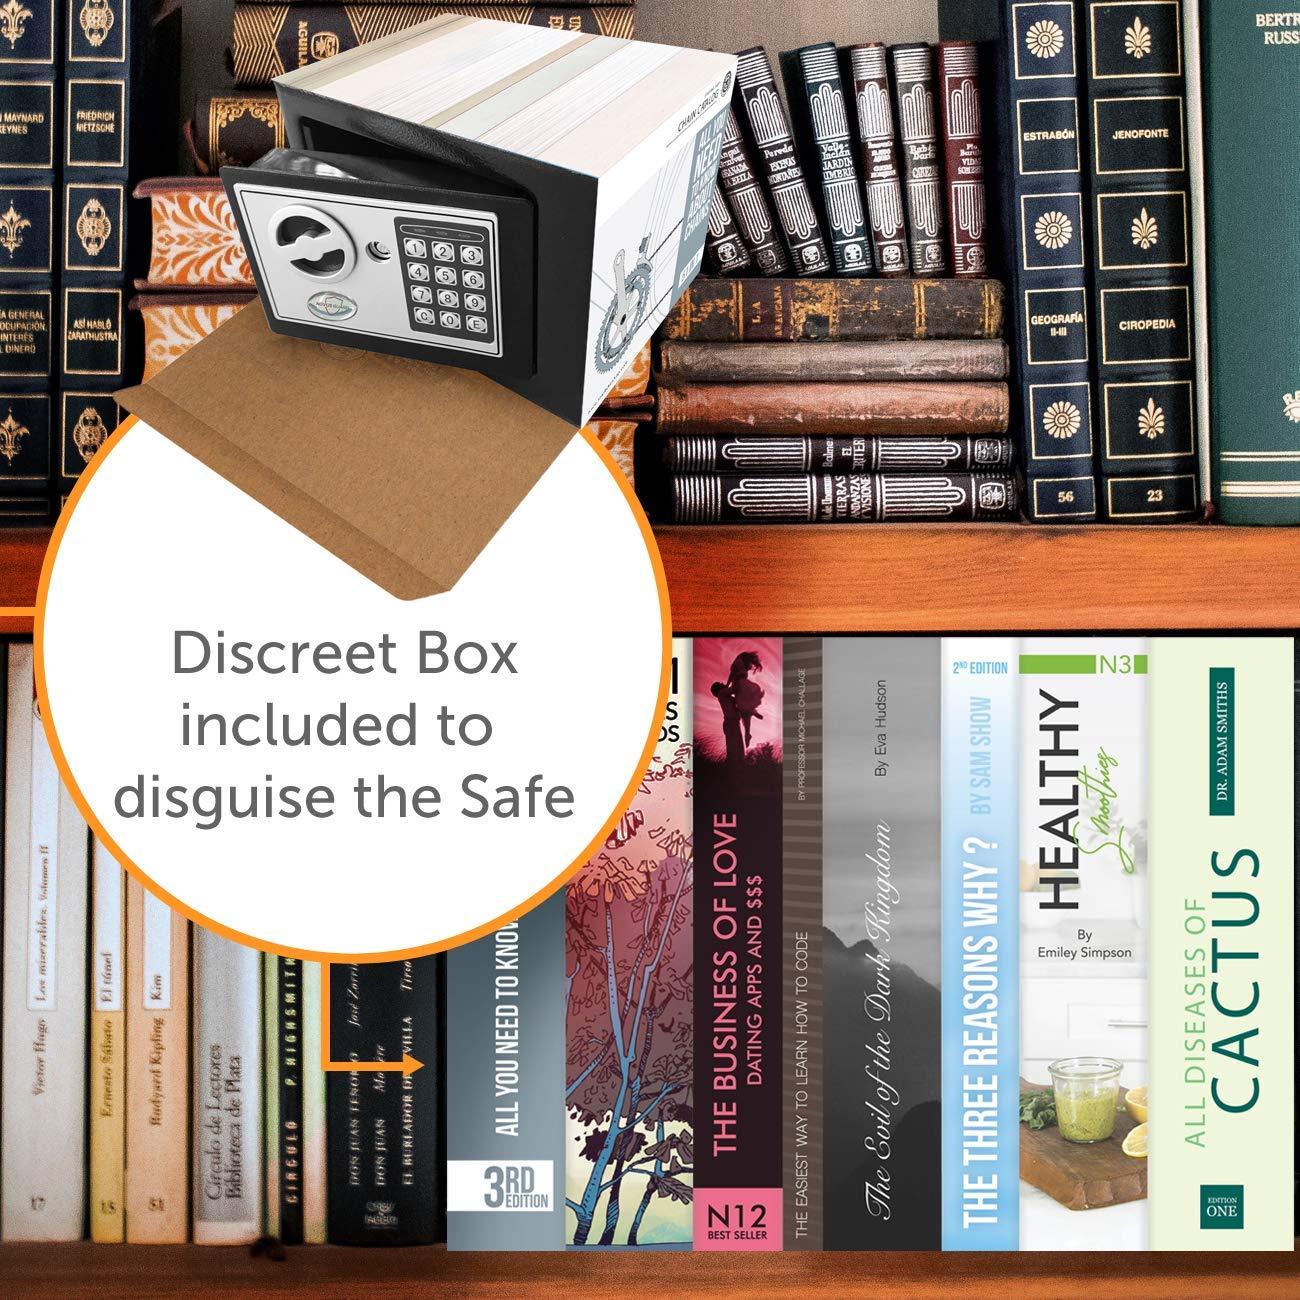 Fake Book Box Hidden Security Safe with Diversion Book Safe Disguise - Concealment Cans